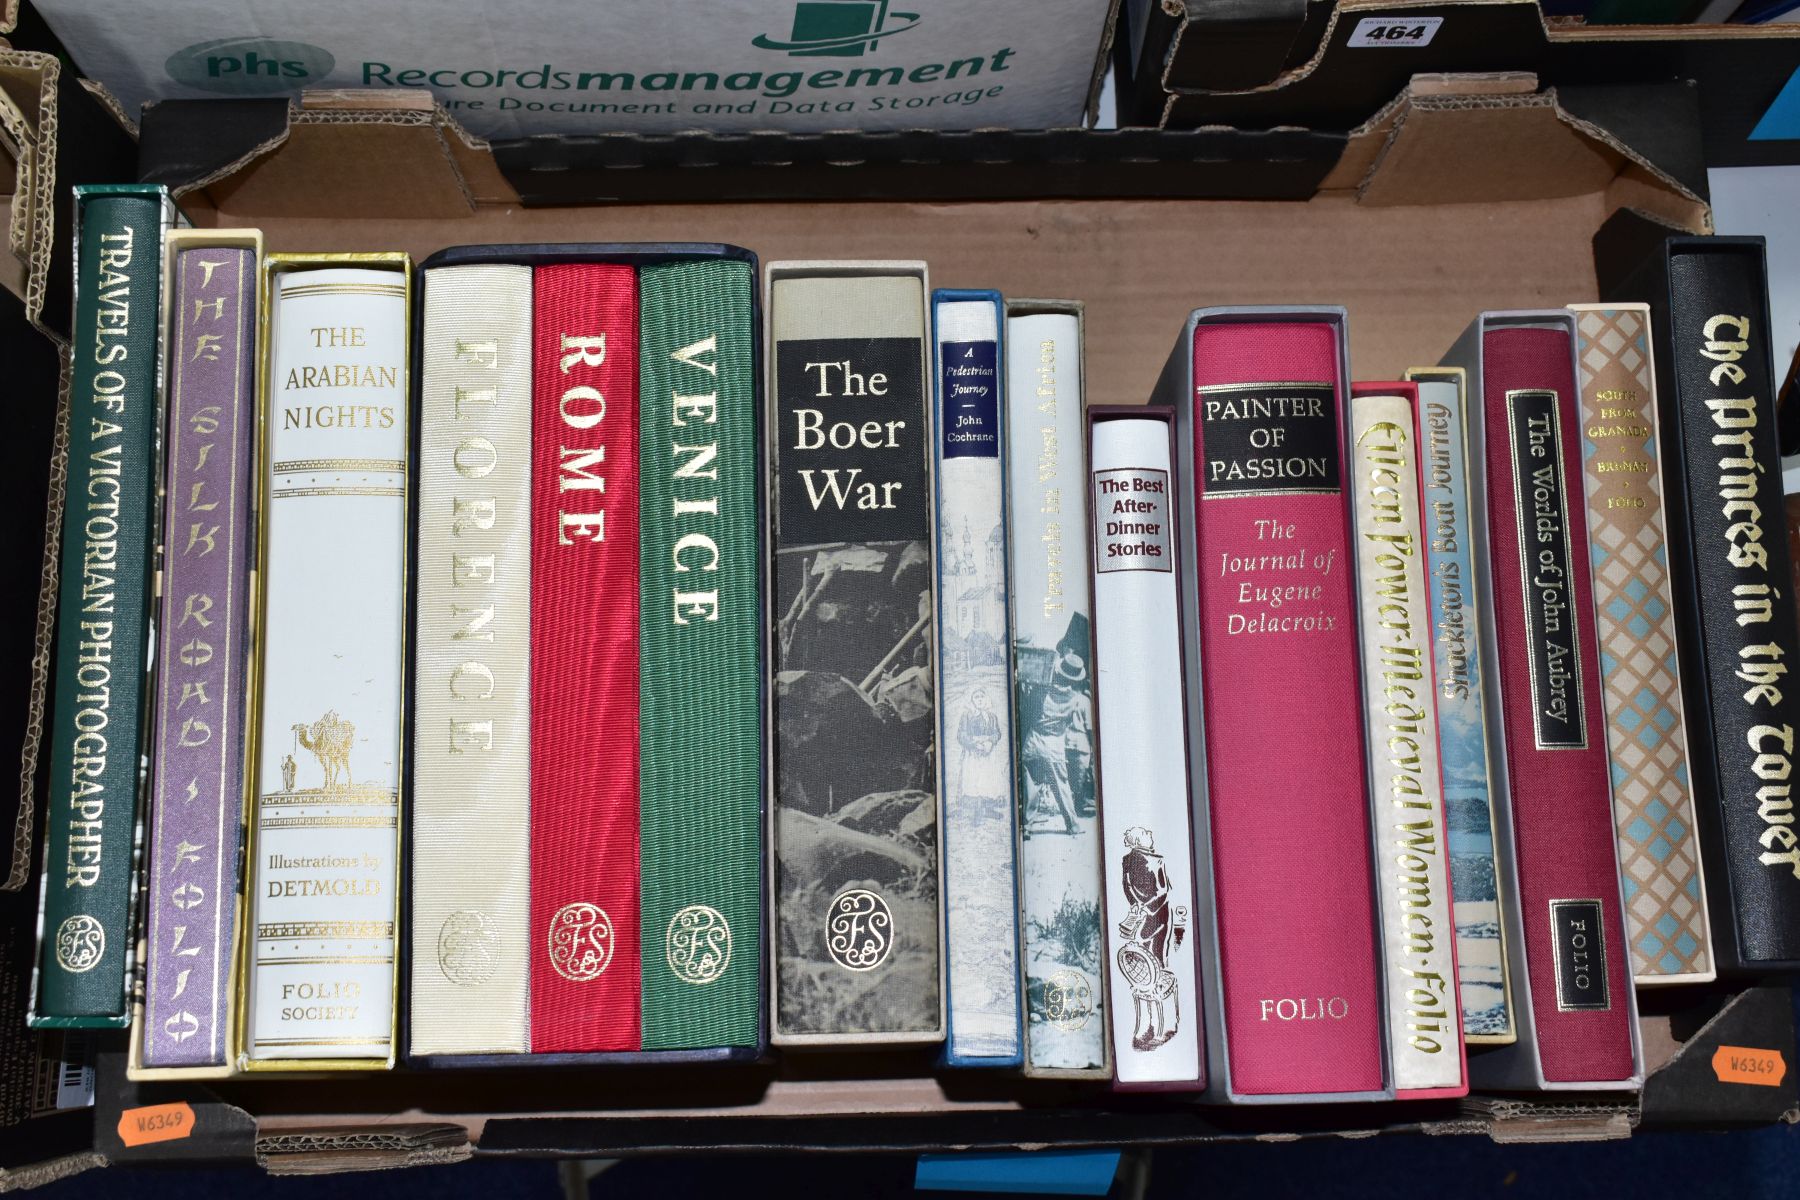 FOLIO SOCIETY BOOKS, sixteen titles from the Publisher comprising Travels of a Victorian